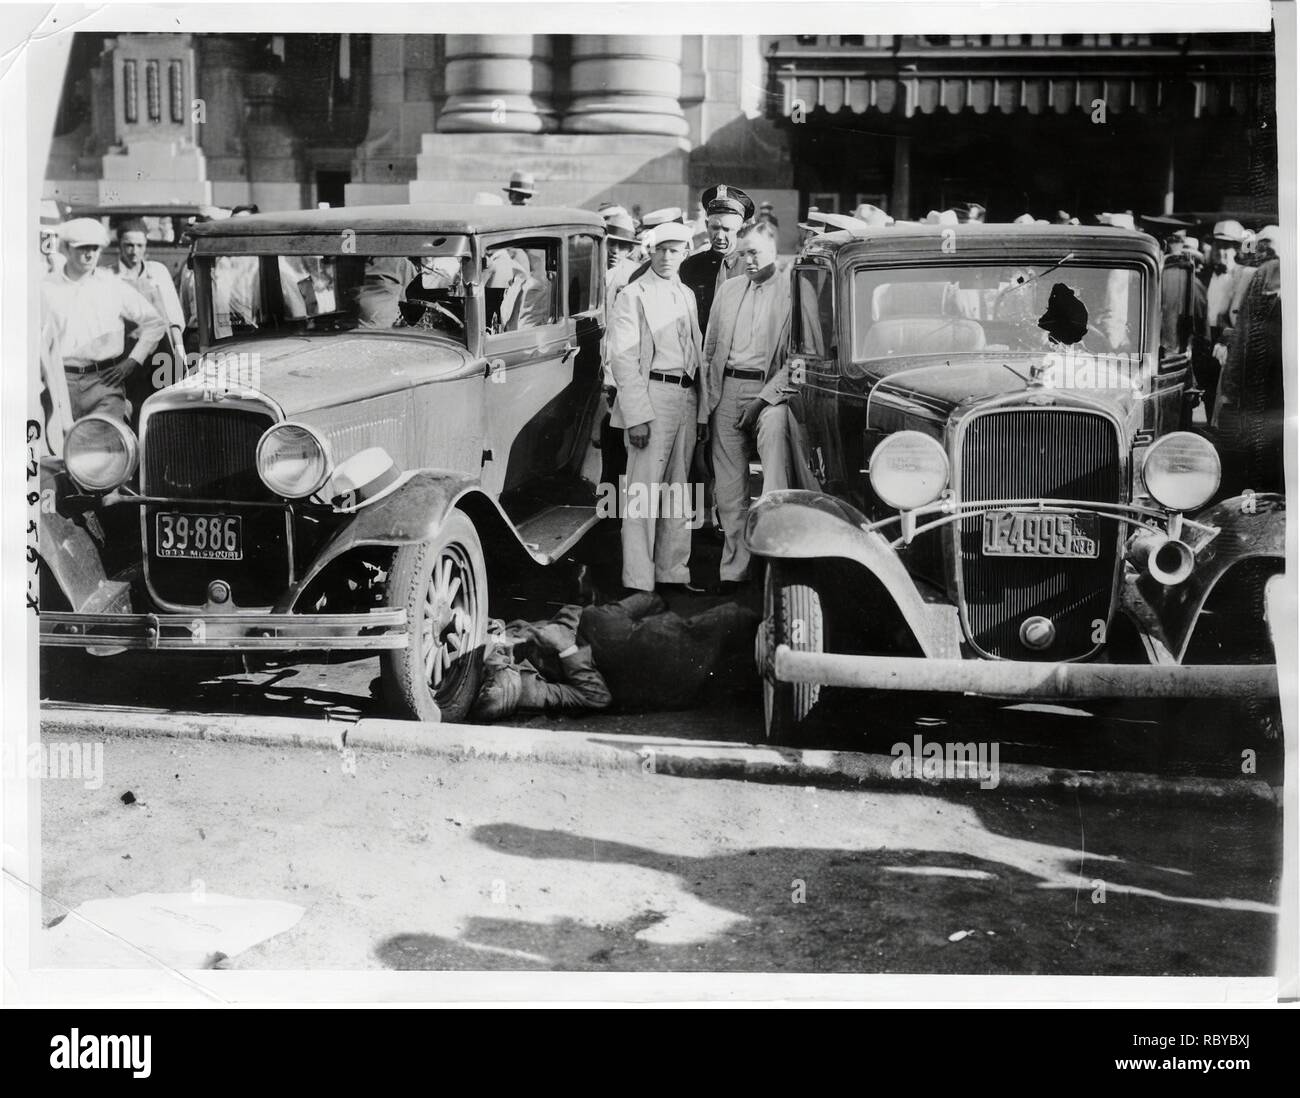 the-kansas-city-massacre-ocurred-on-the-morning-of-june-17-1933-law-enforcement-officers-were-escorting-bank-robber-frank-nash-back-to-prison-when-they-were-ambushed-by-outlaws-RBYBXJ.jpg